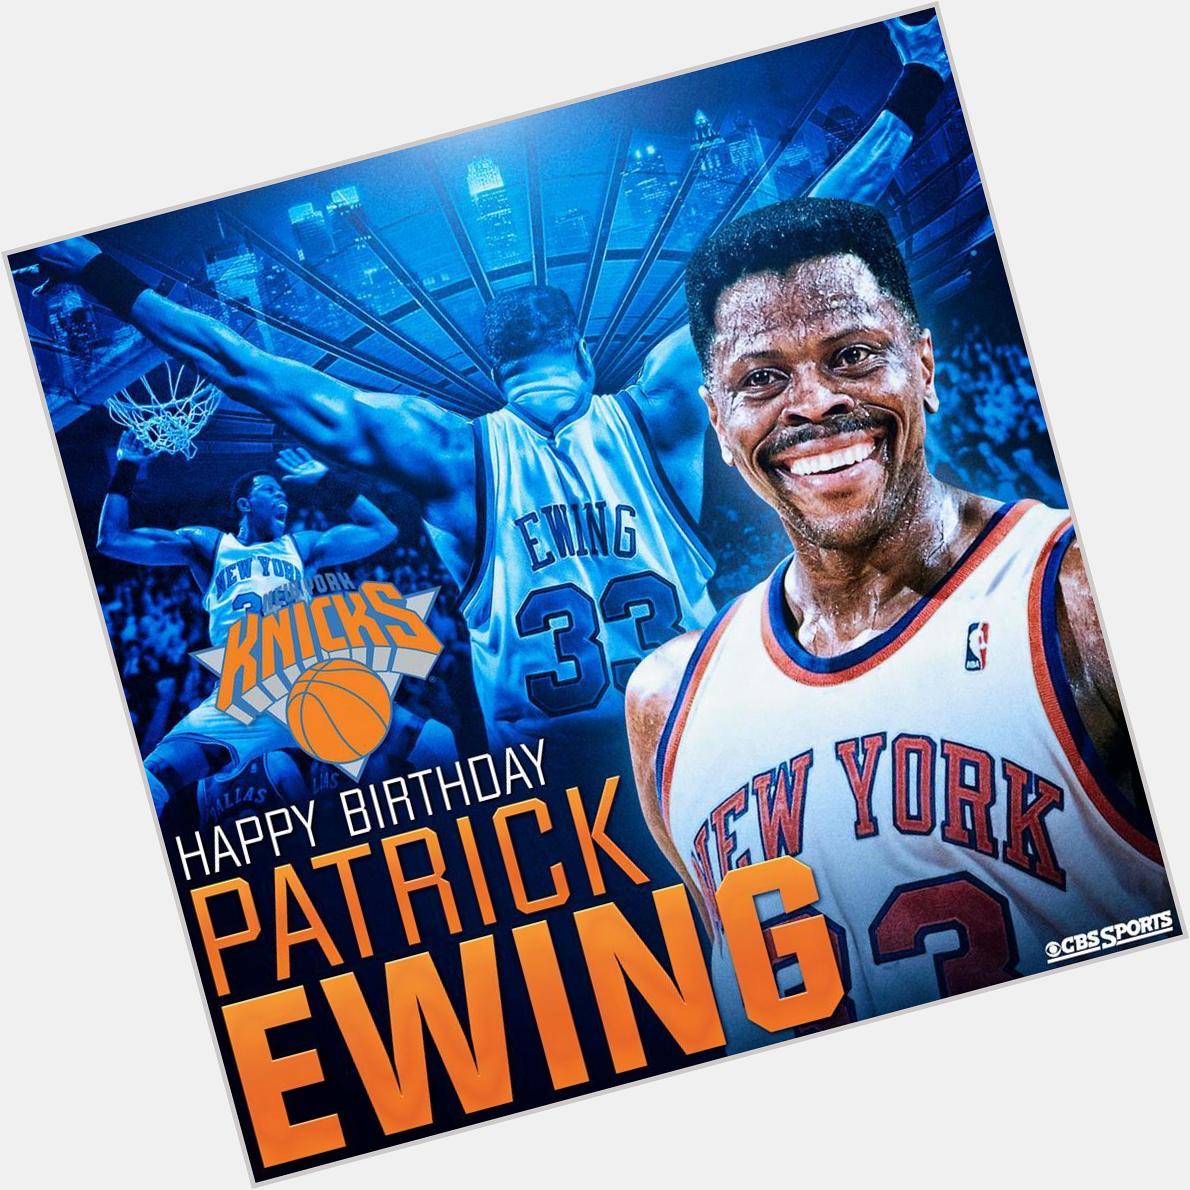 Happy Birthday to Patrick Ewing. When the the were really good 